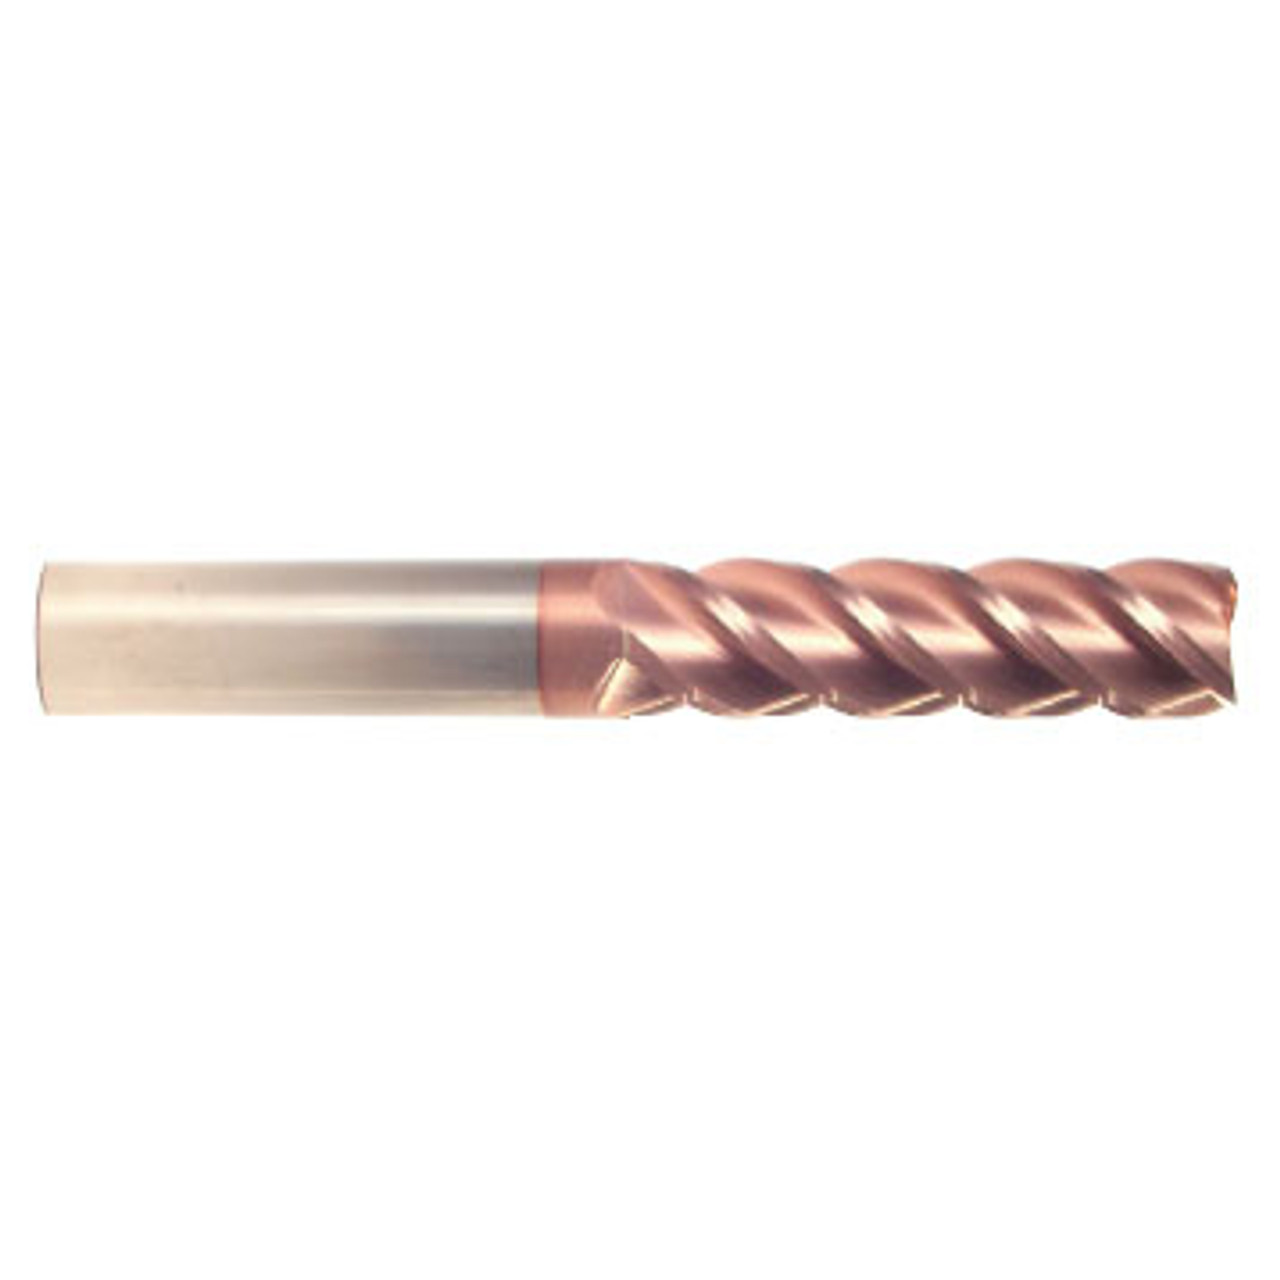 1/4 4 Flute Double END STUB TiCN Coated Carbide END Mill